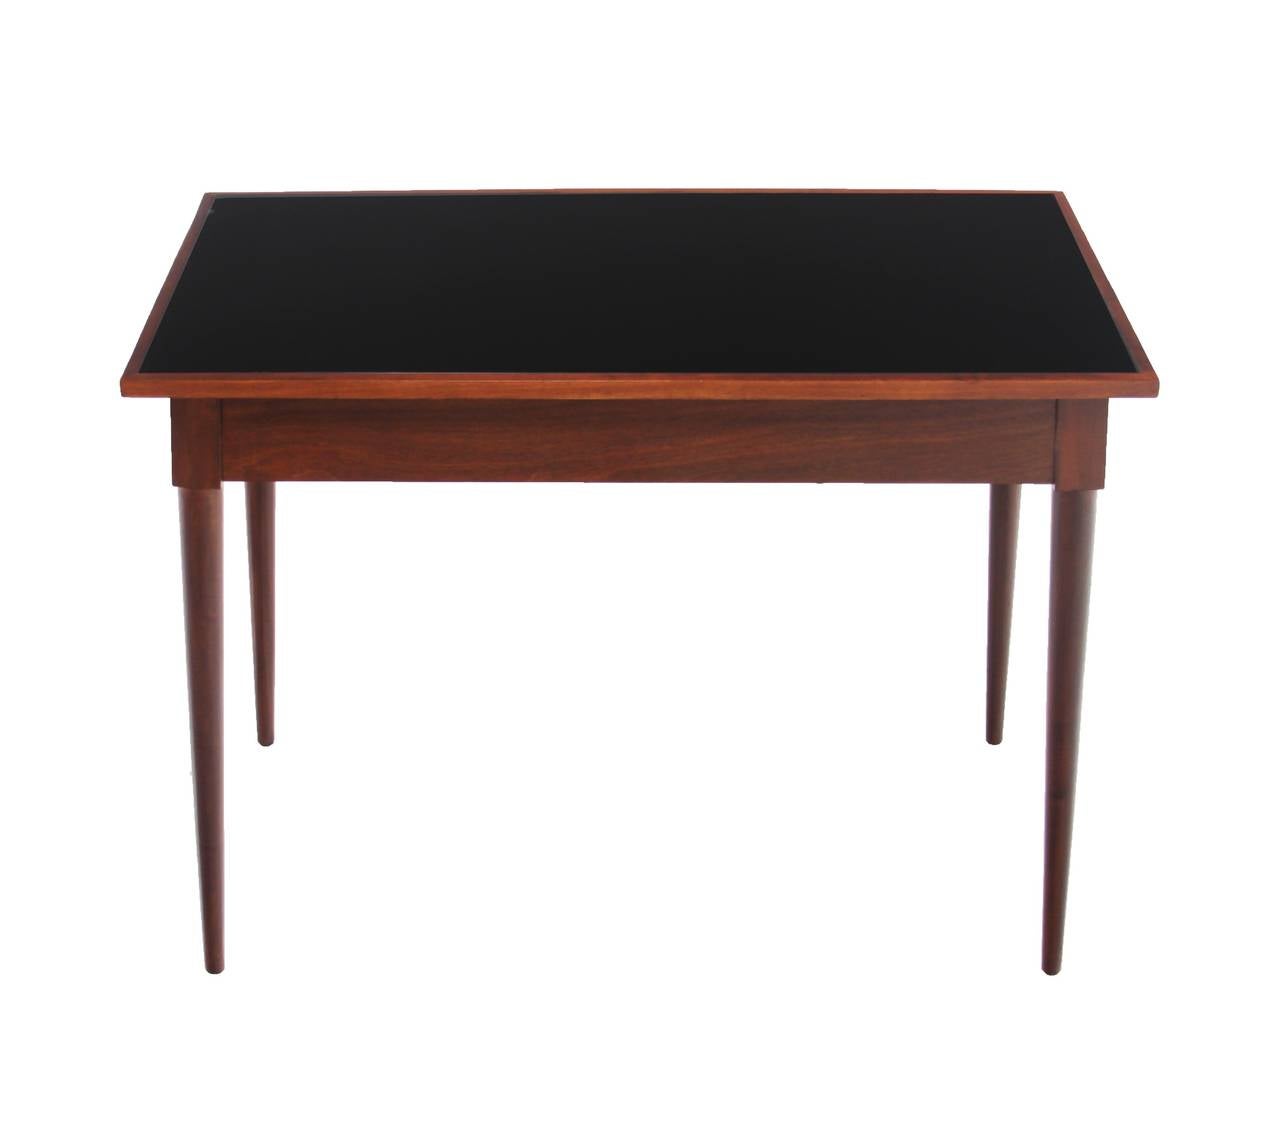 Giuseppe Scapinelli for Tepperman Freijo Table with Black Glass In Good Condition For Sale In Los Angeles, CA